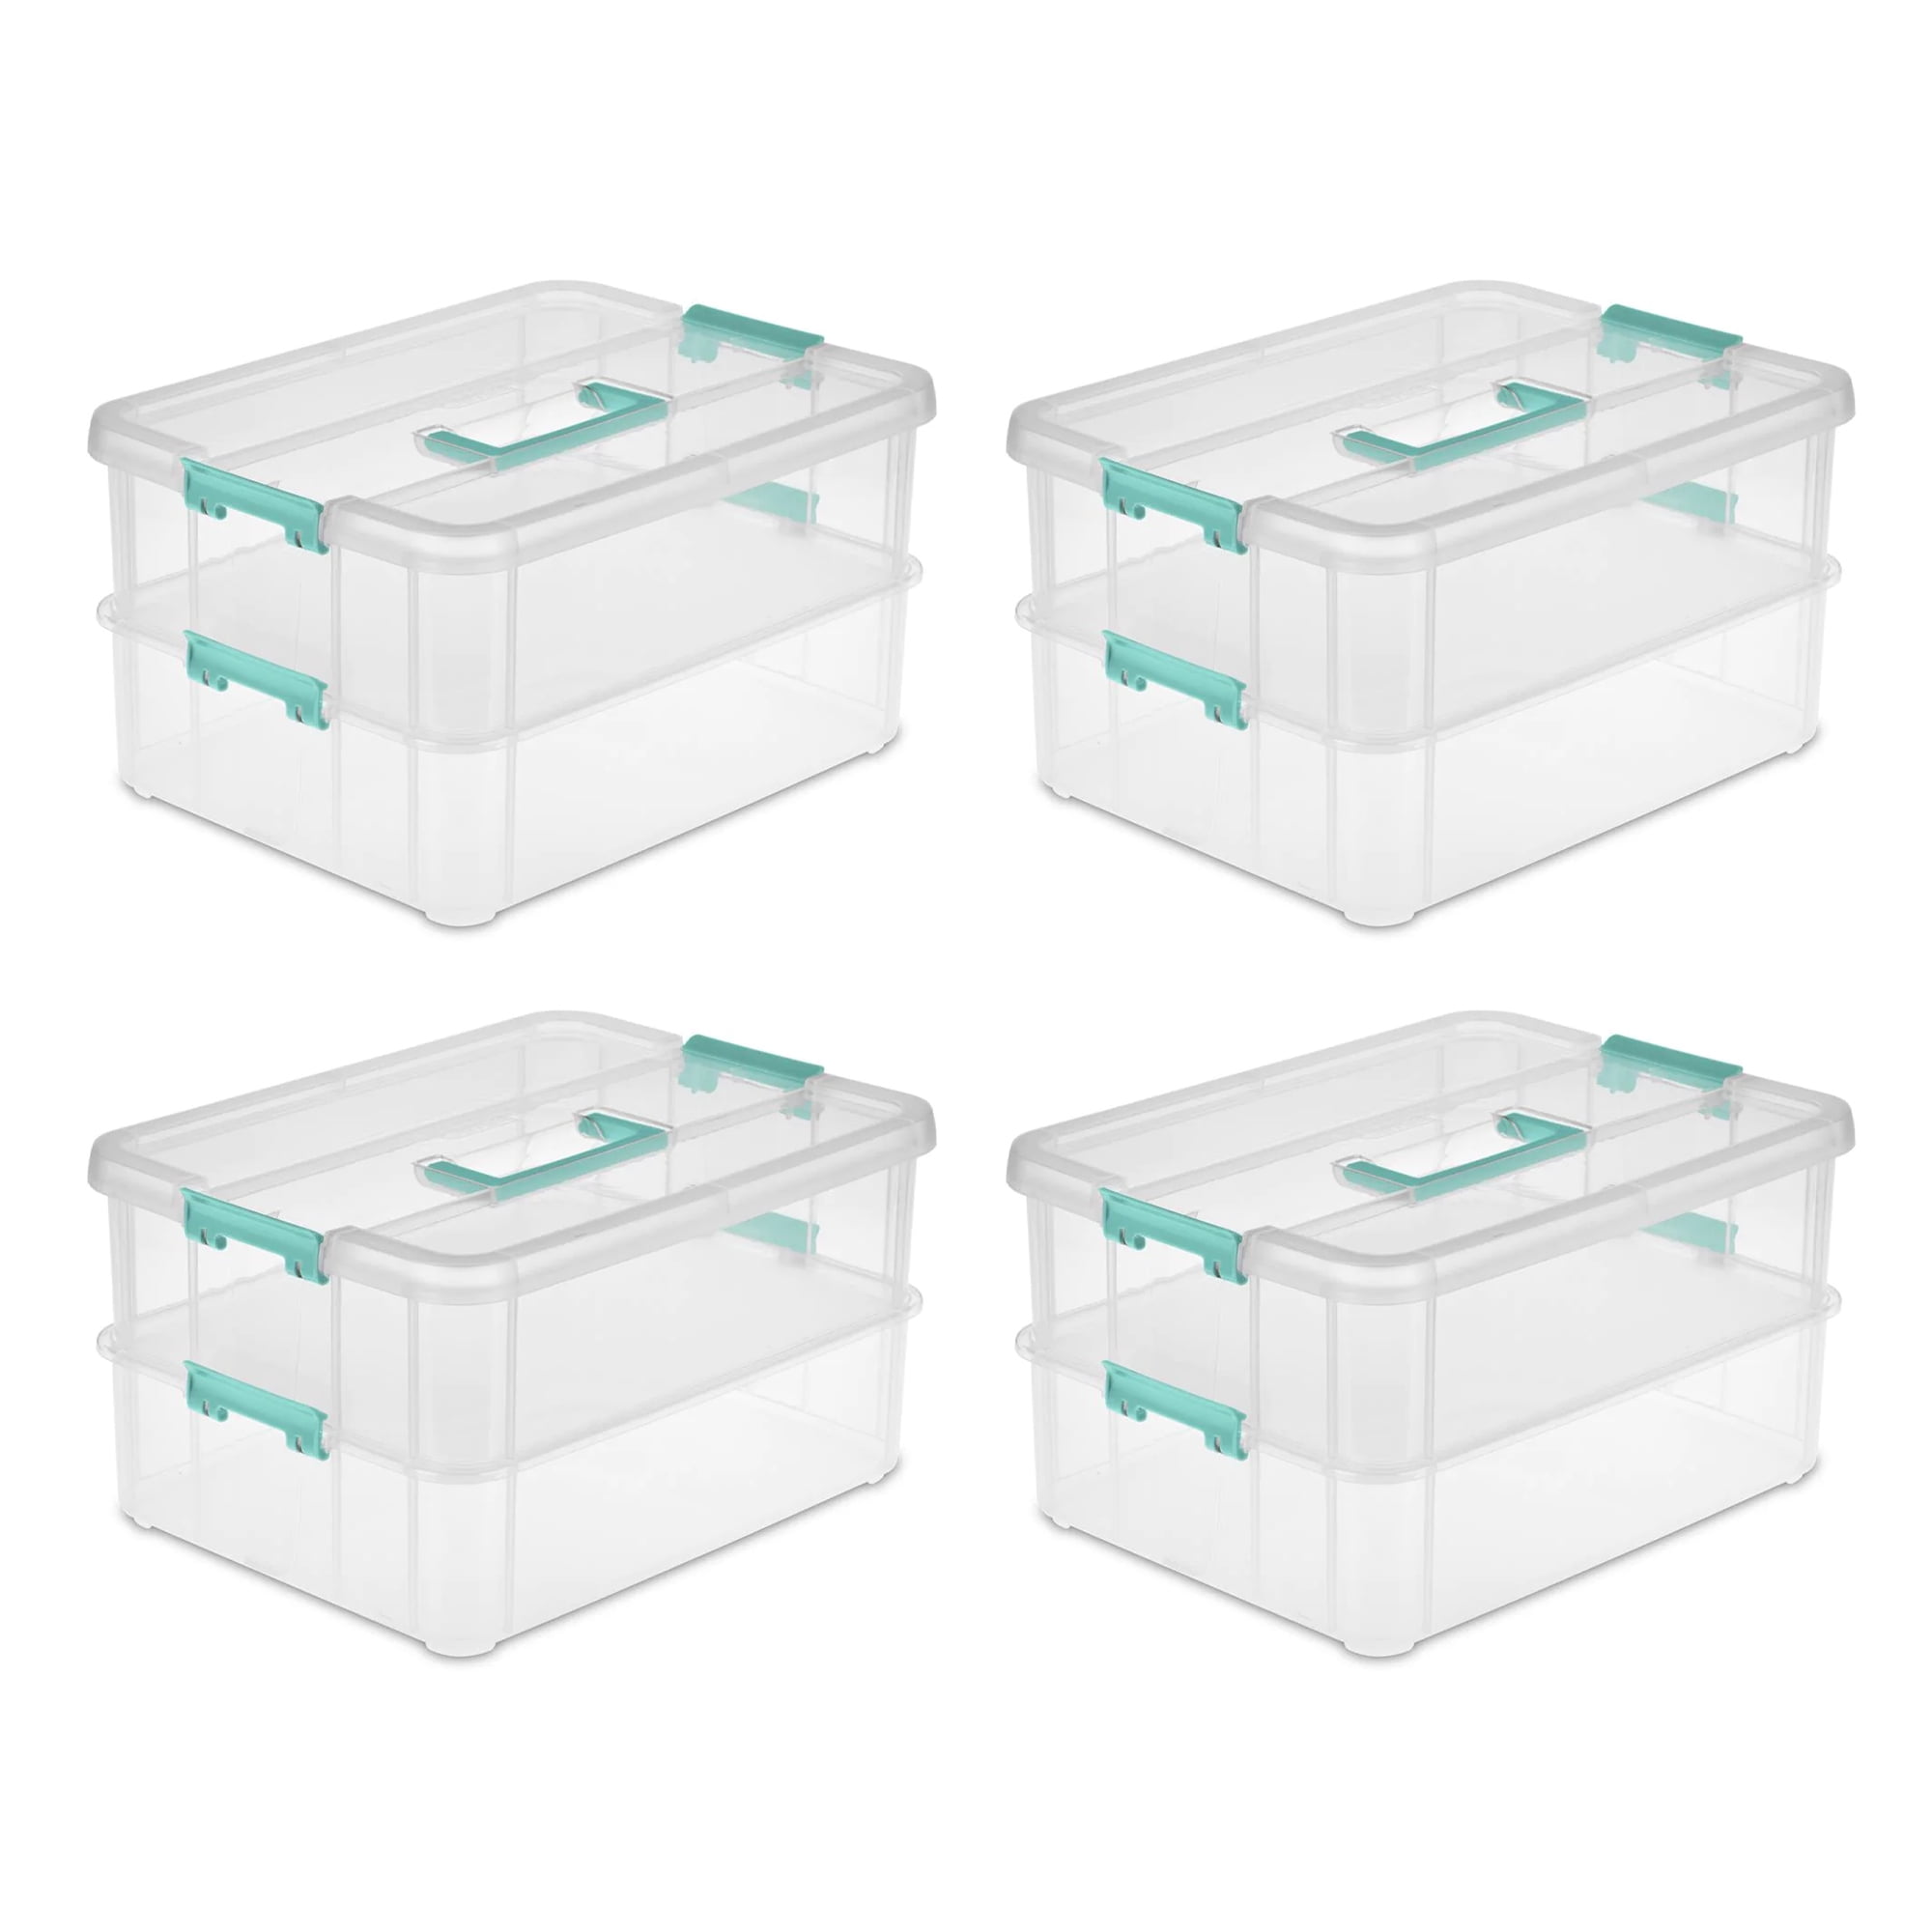 4 Pack Sterilite 14228604 Stack & Carry 2 Layer Handle Box Clear/Aqua for sale online 